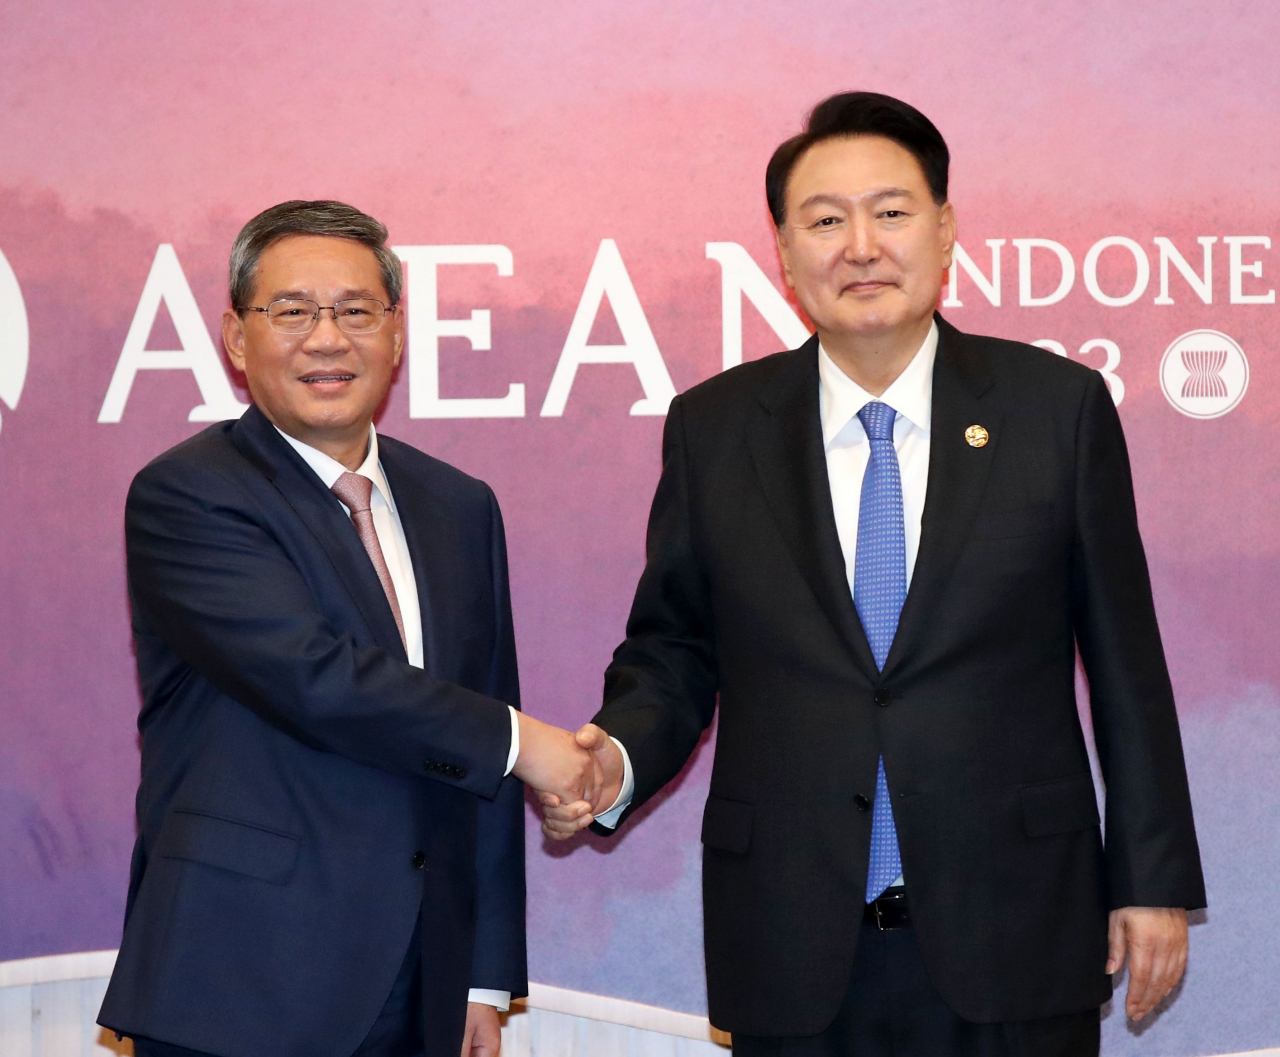 President Yoon Suk Yeol (right) shakes hands with Chinese Premier Li Qiang at the Korea-China meeting held at the Jakarta Convention Center in Indonesia on Thursday. (Yonhap)